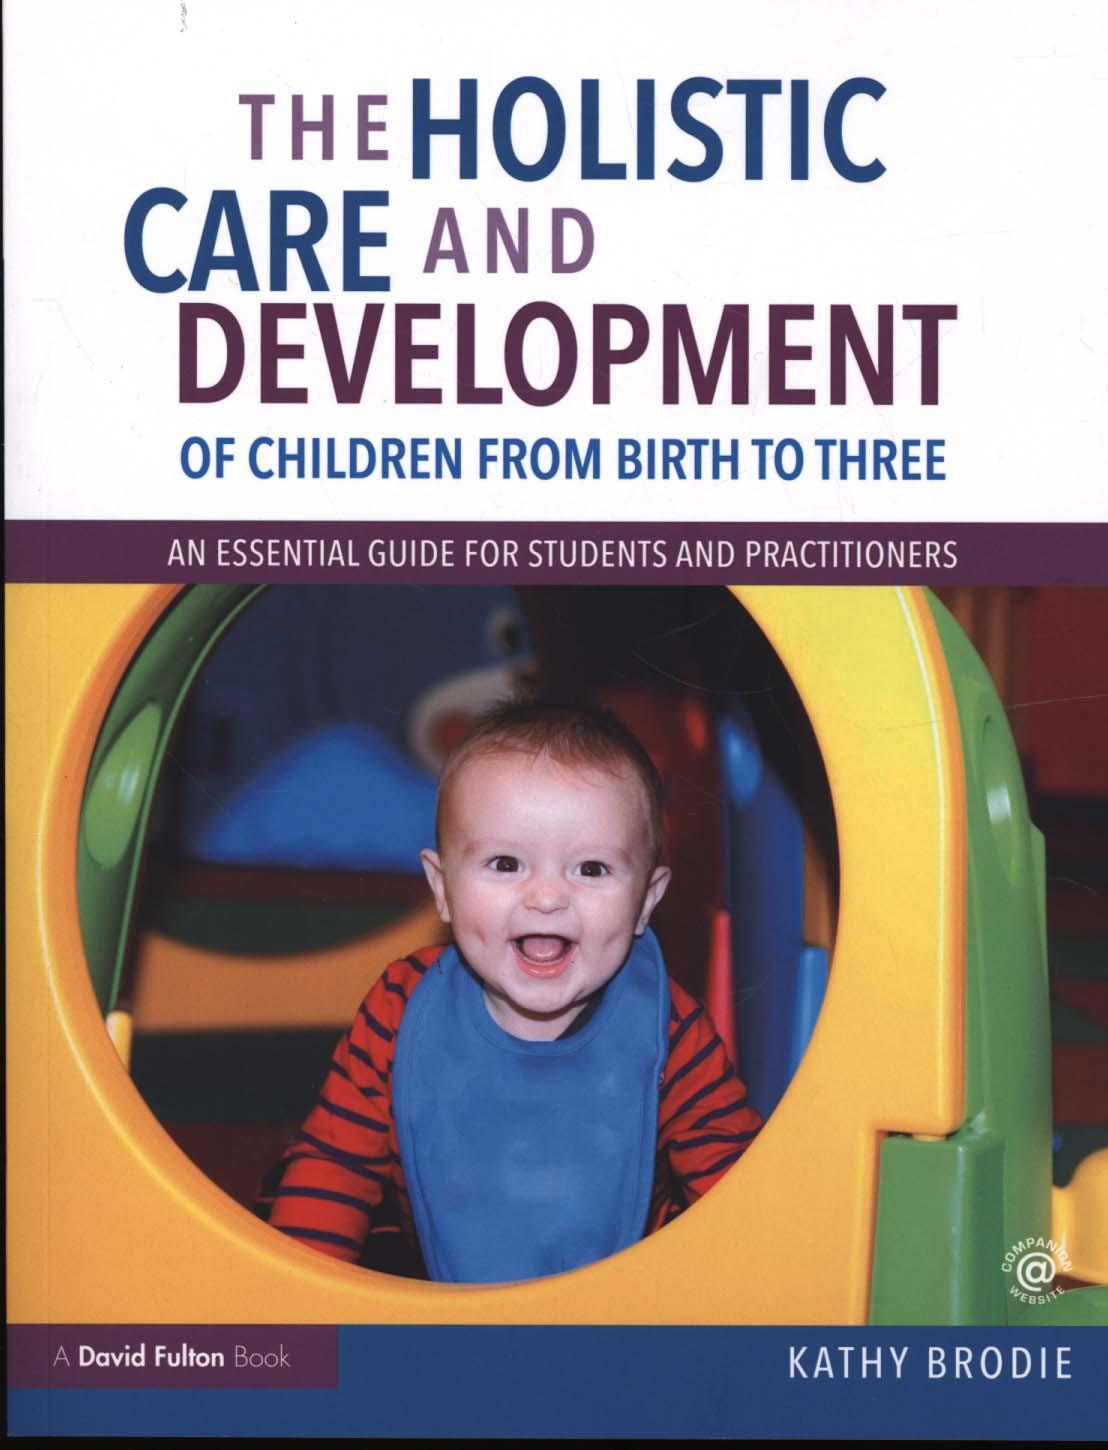 Holistic Care and Development of Children from Birth to Thre - Kathy Brodie